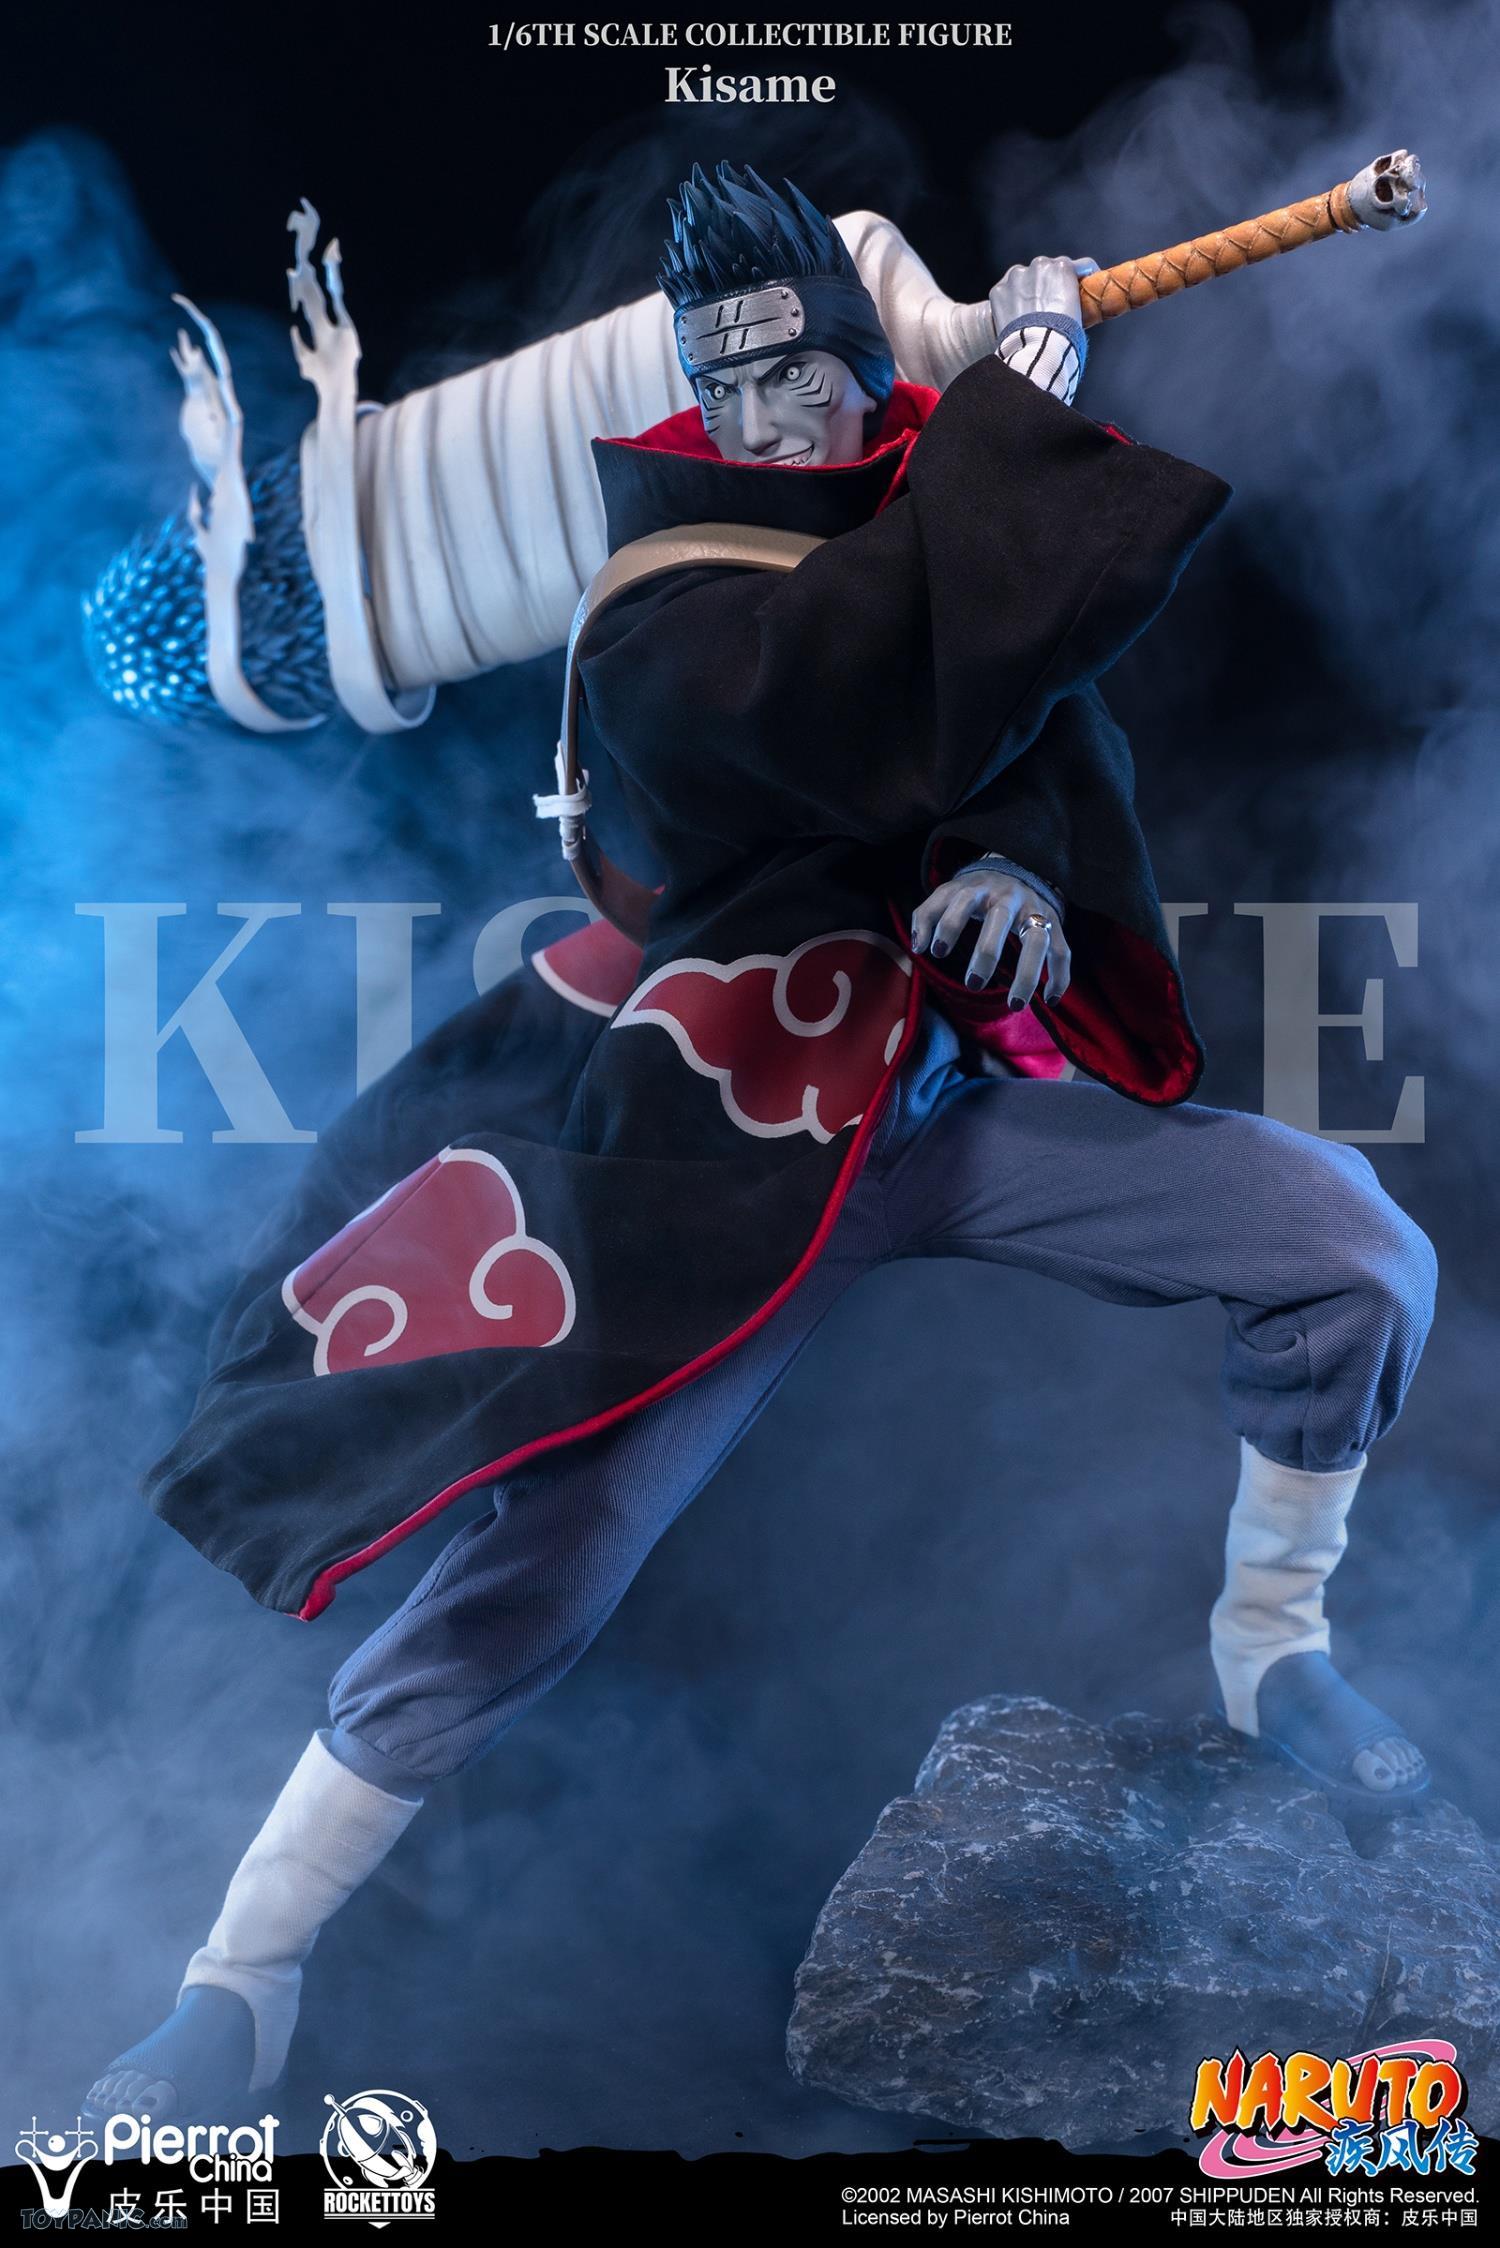 male - NEW PRODUCT: Rocket Toys ROC-007 1/6 Scale Kisame 221202460435PM_6417009